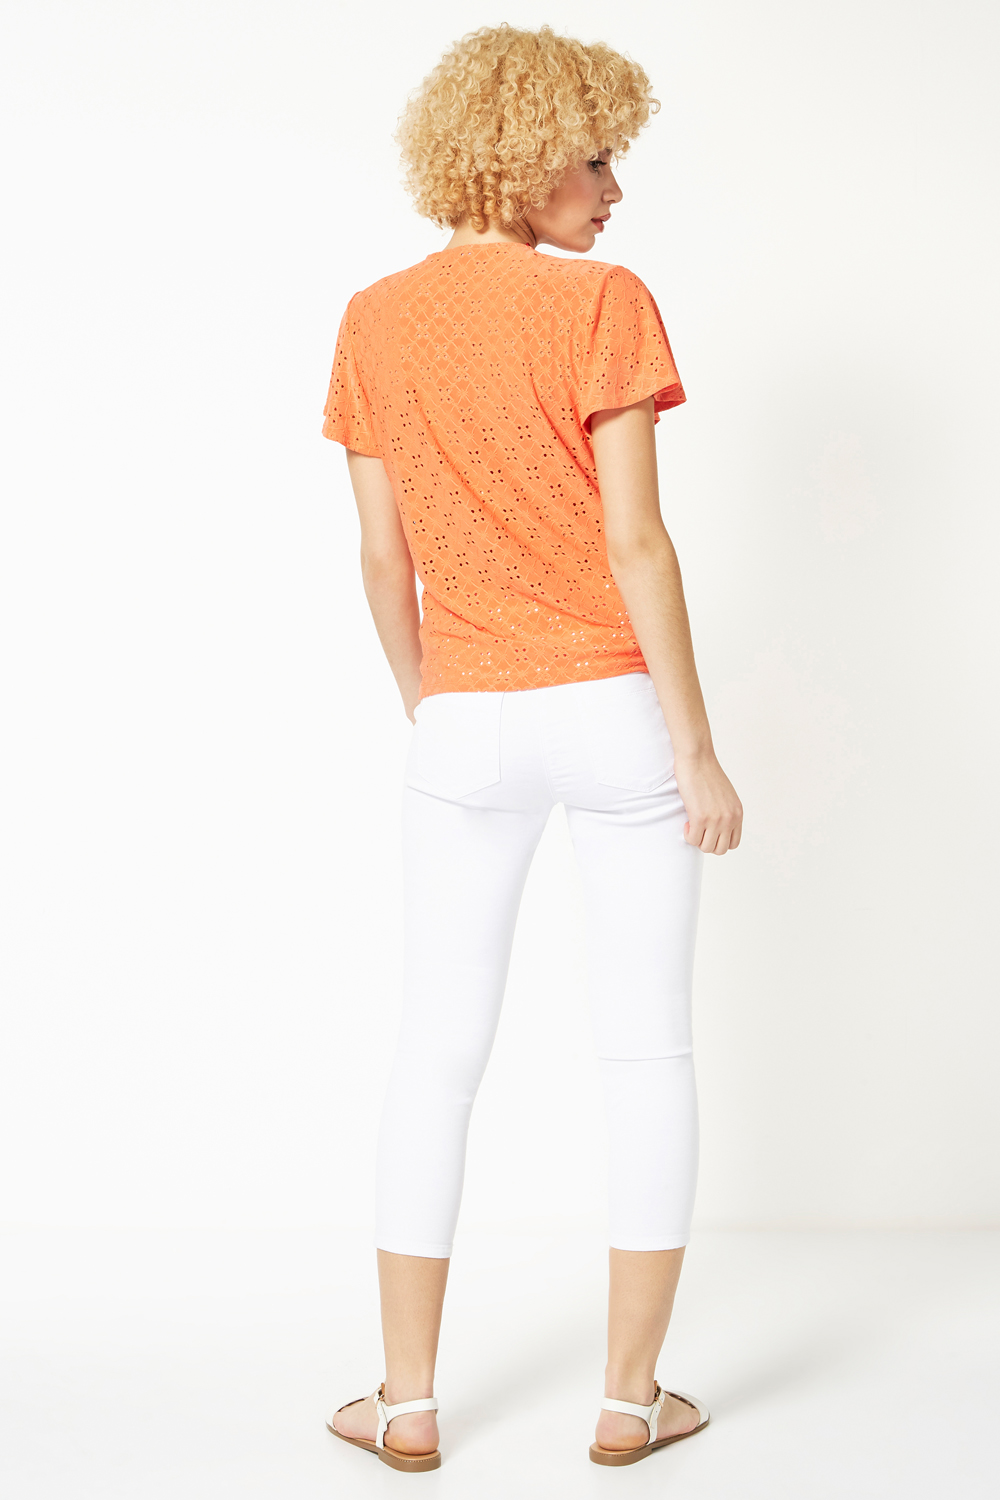 CORAL Broderie Stretch Jersey Tie Front Top, Image 3 of 4